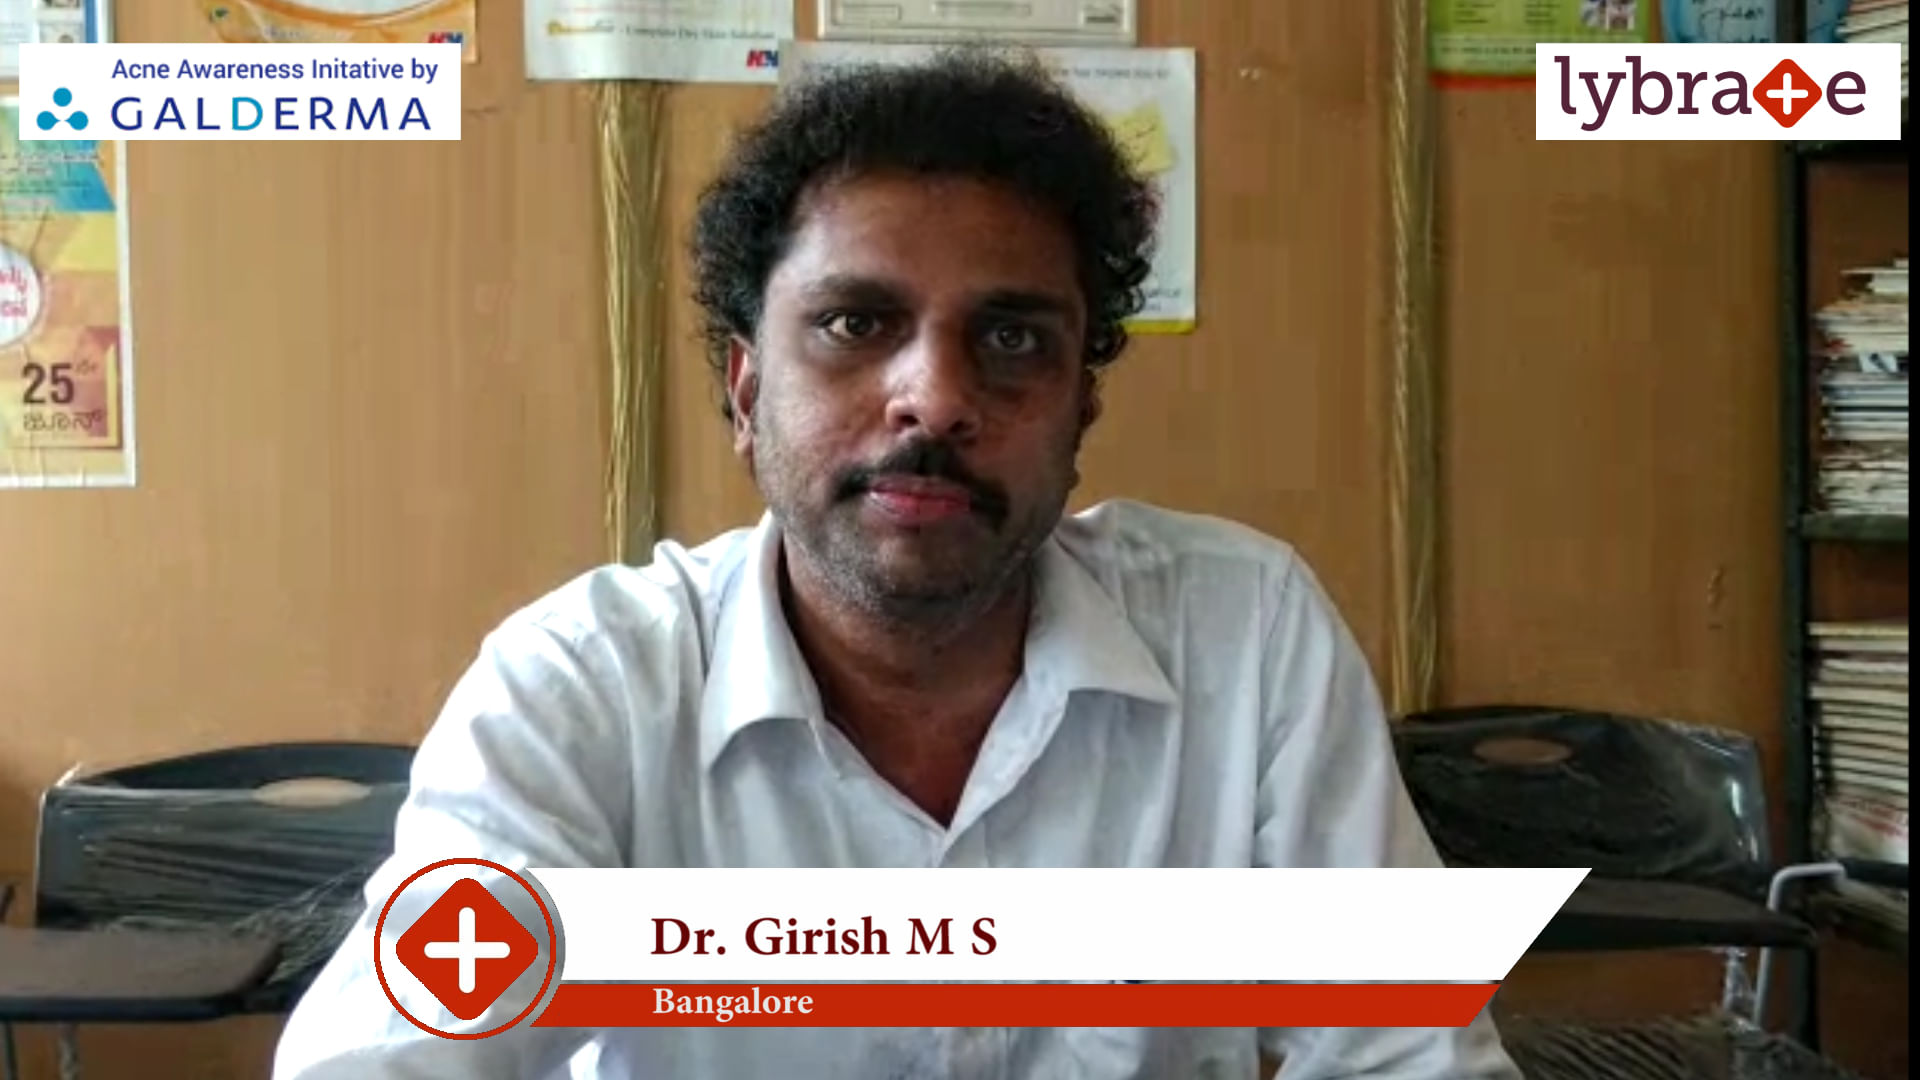 Lybrate | Dr. Girish M S speaks on IMPORTANCE OF TREATING ACNE EARLY